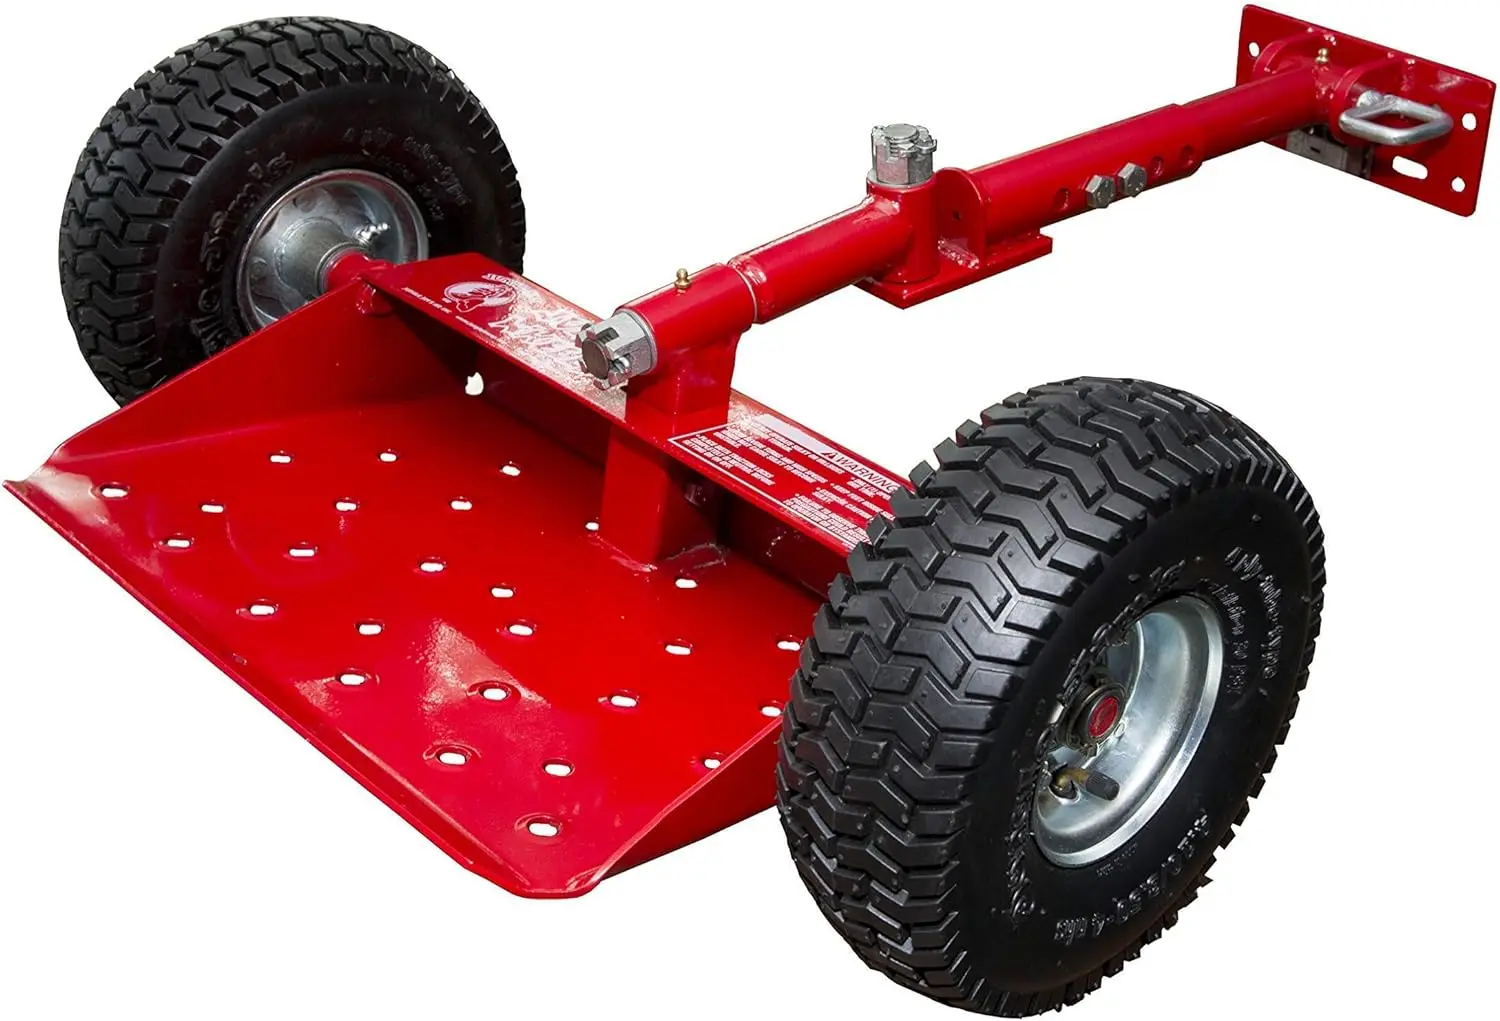 

Jungle Jim's Jungle Wheels Lawn Mower Sulky for Lawn and Landscape Professionals (Red Jungle Wheels)